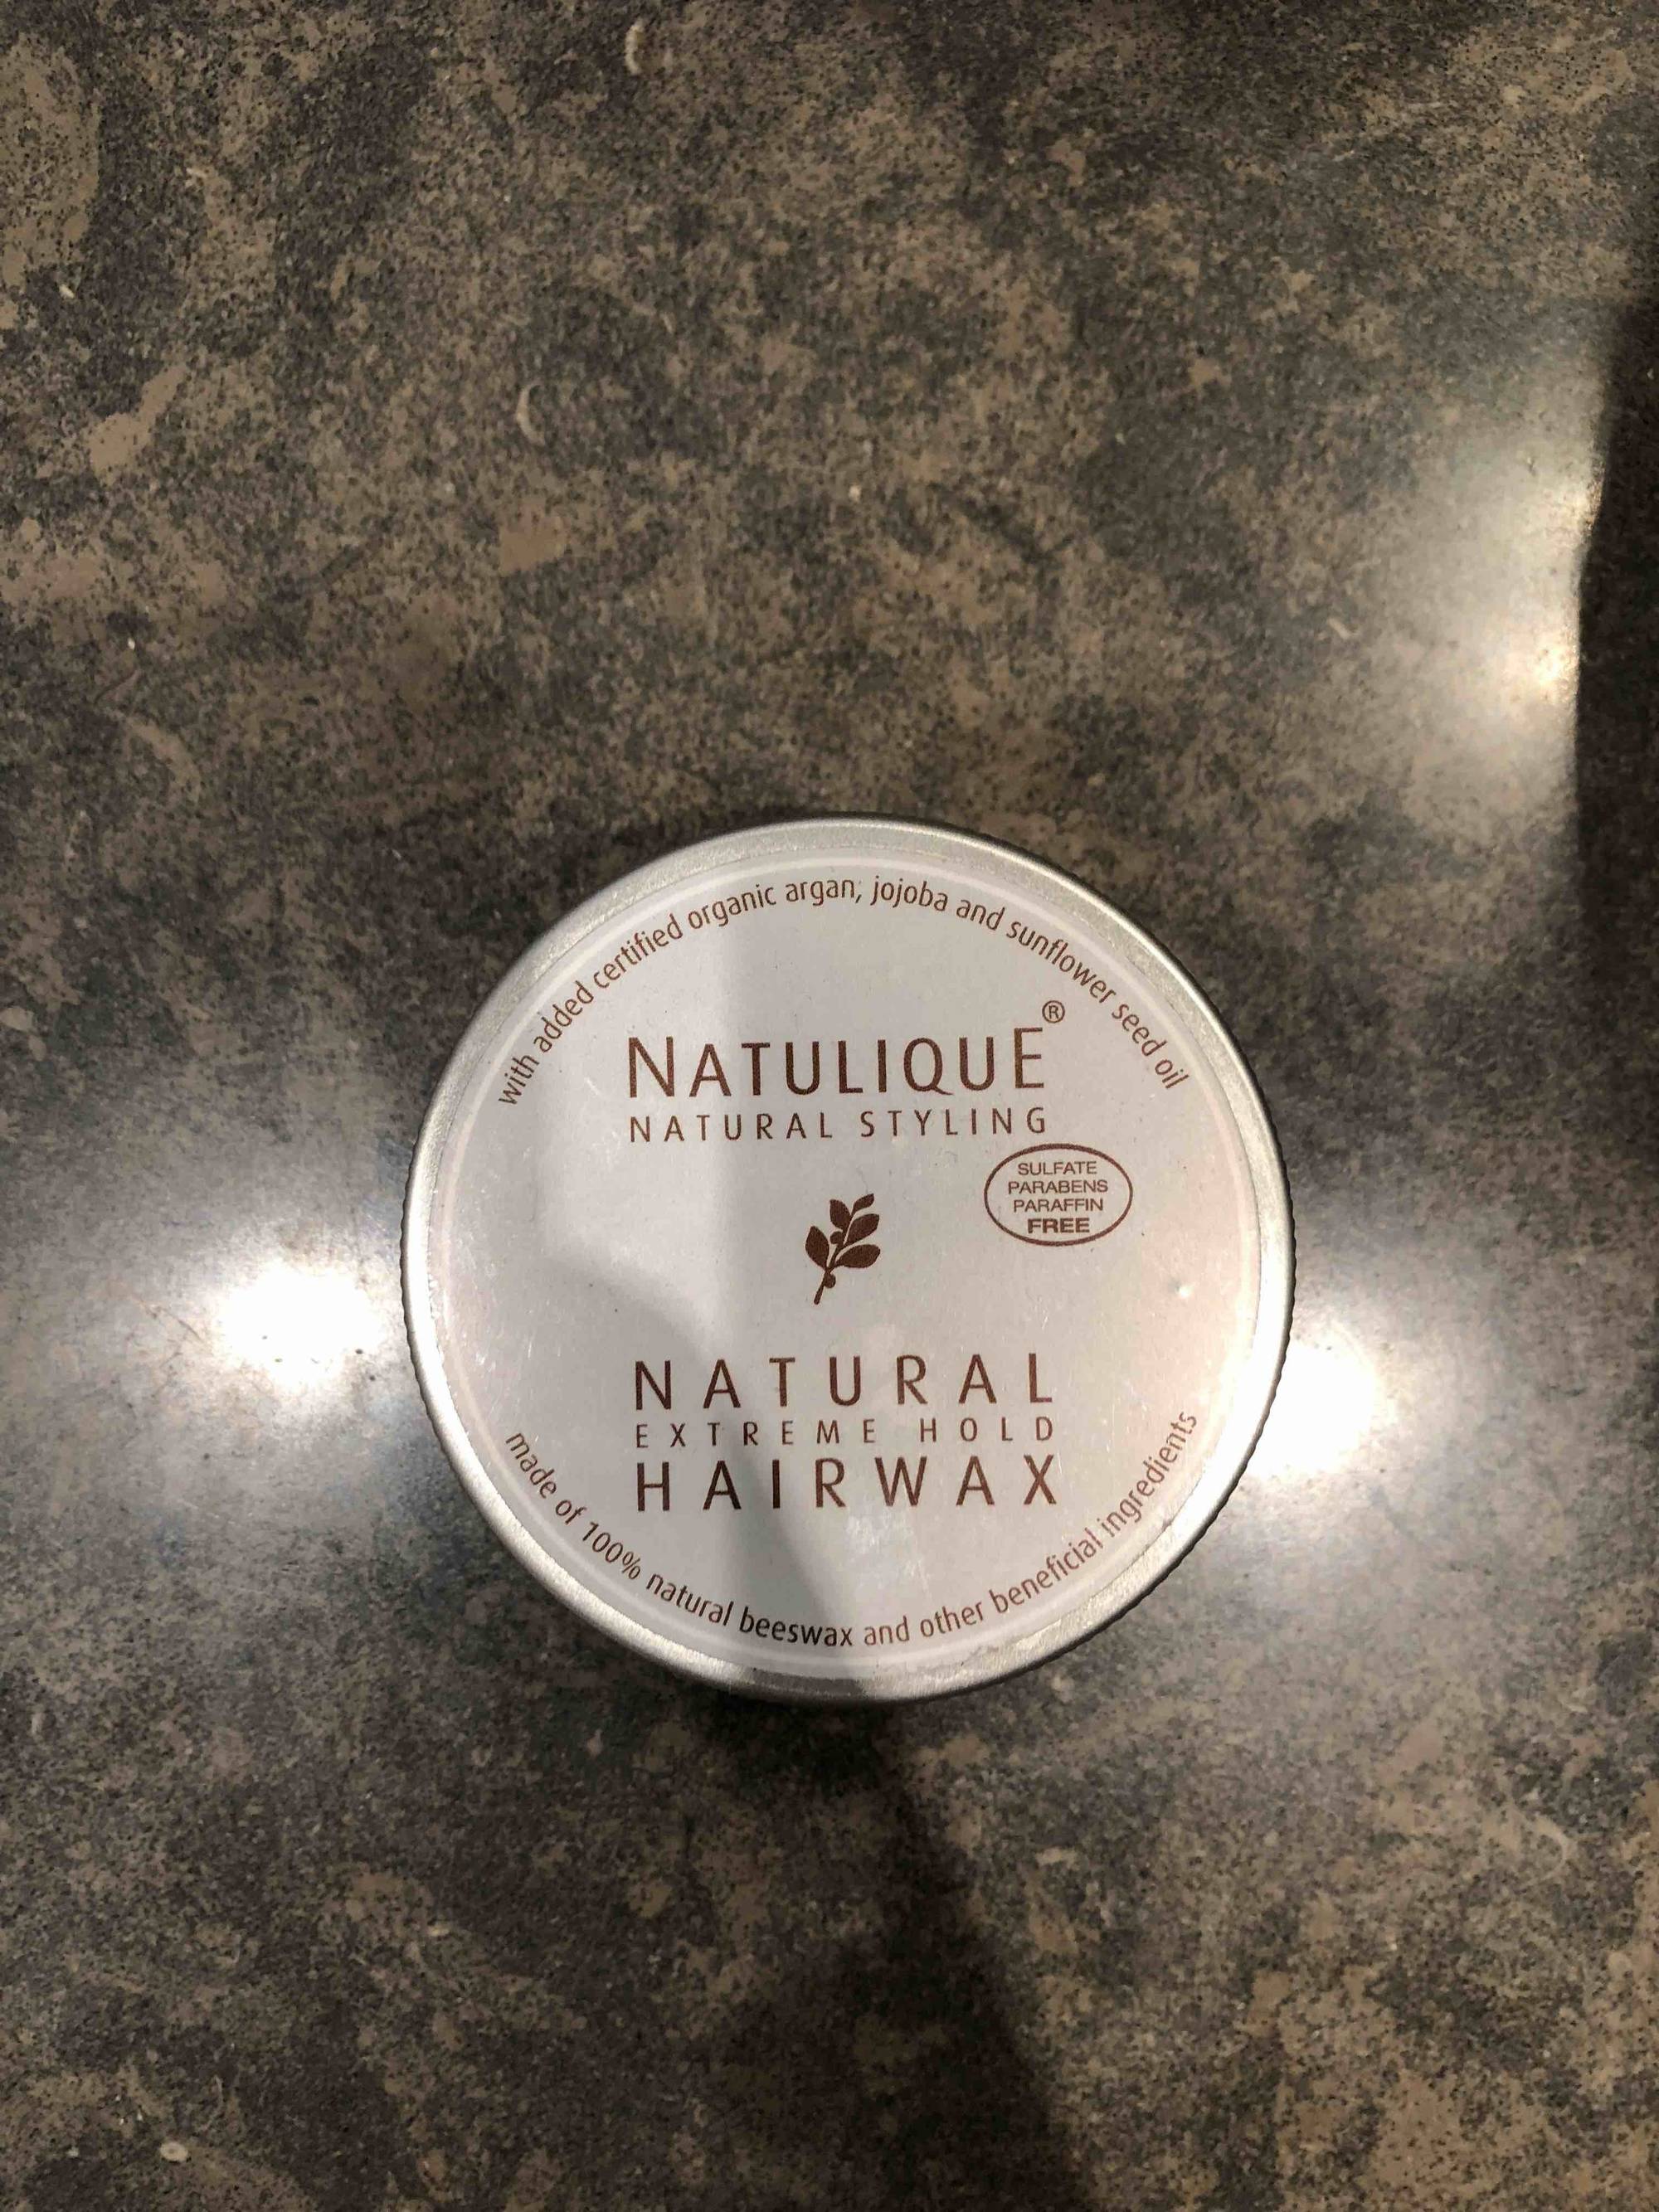 NATULIQUE - Natural extreme hold hairwax